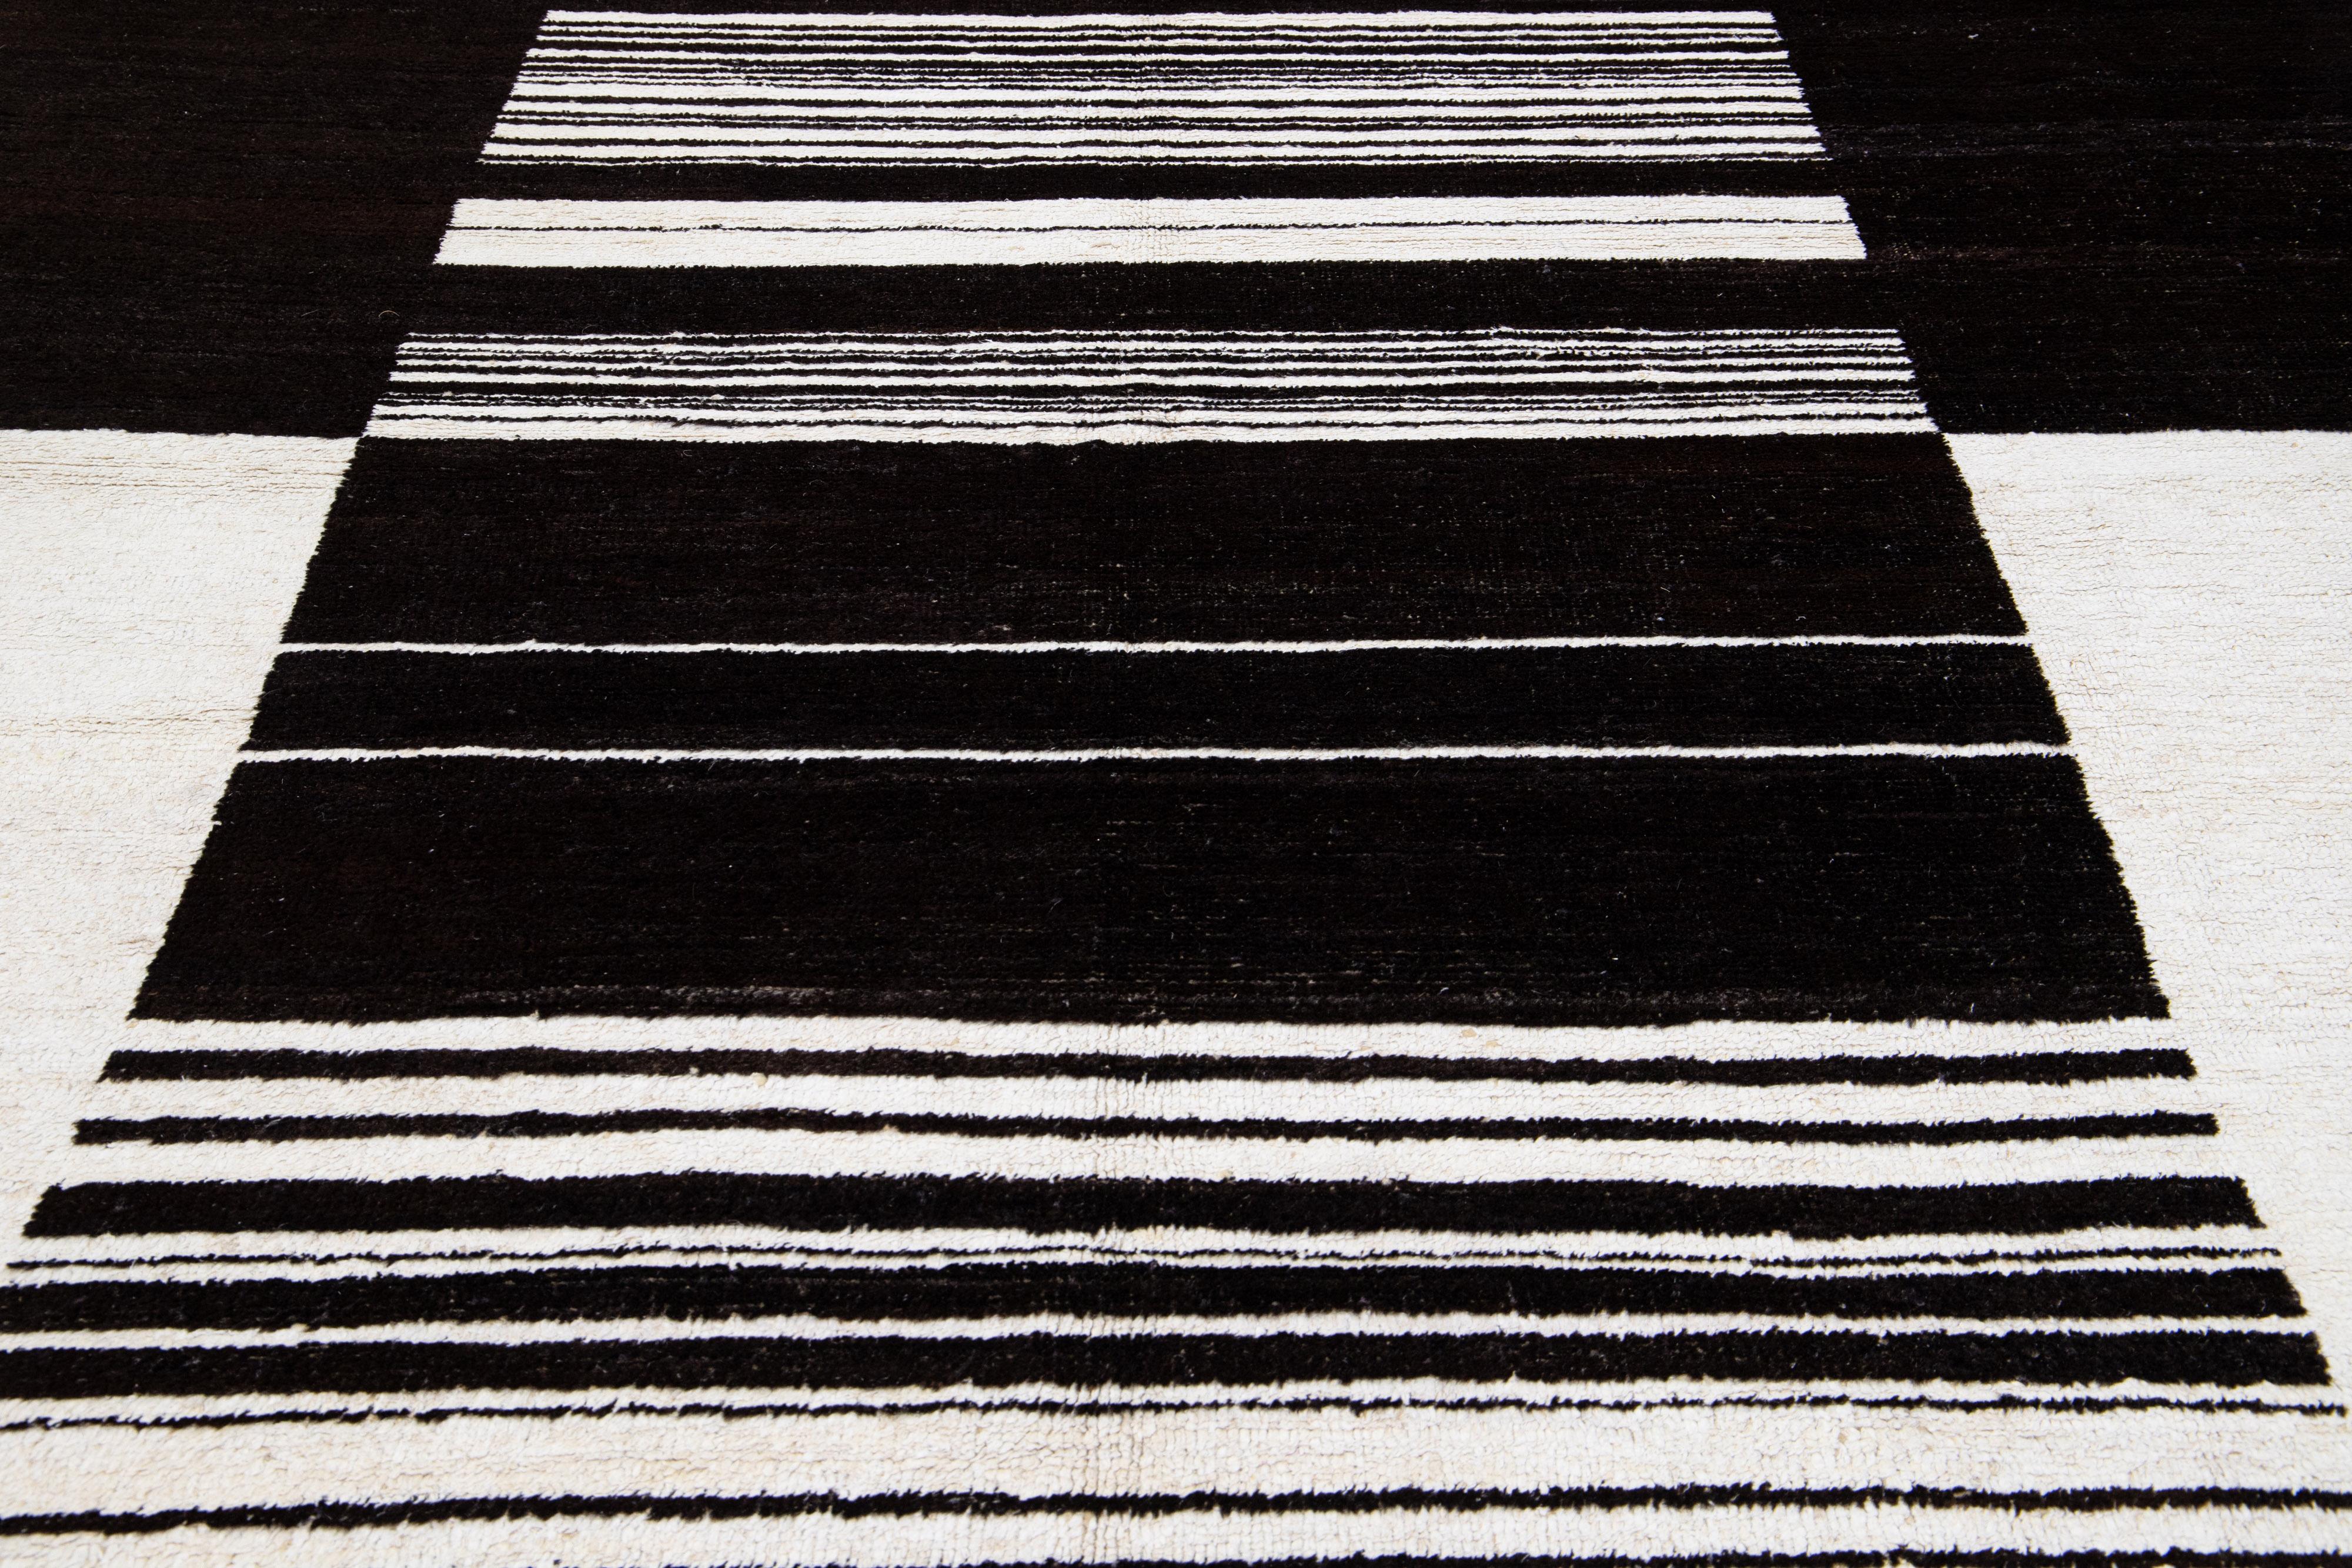 Crafted with expert skill, this Modern Moroccan wool rug 9 X 12 is hand-knotted from premium wool. It features a striking white and black color field design complemented by a minimalist abstract motif.

This rug measures: 9' x 12'1